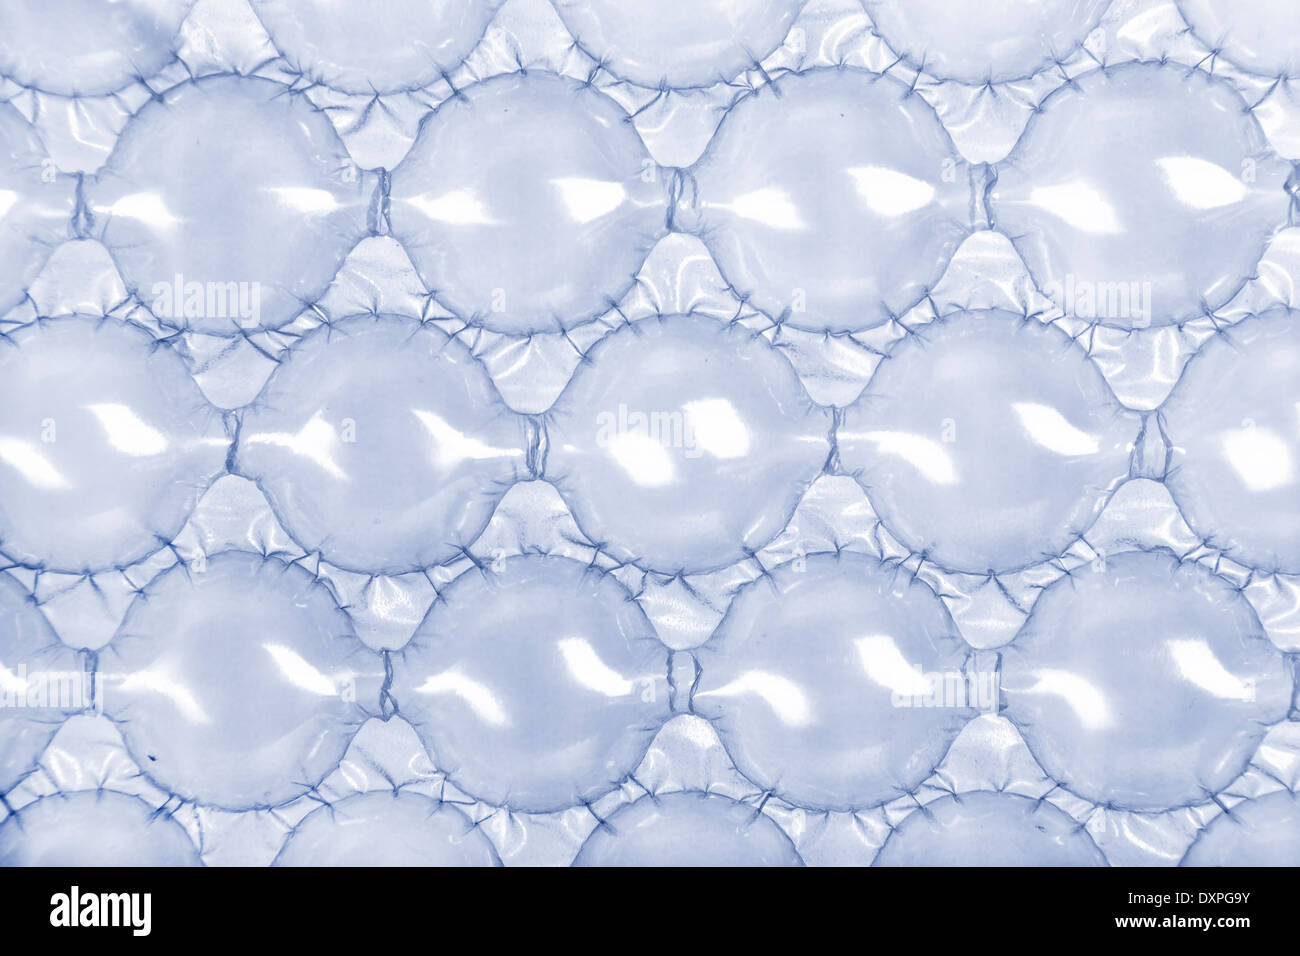 Blue bubble wrap with extra large blue bubbles for packing large fragile  items Stock Photo - Alamy